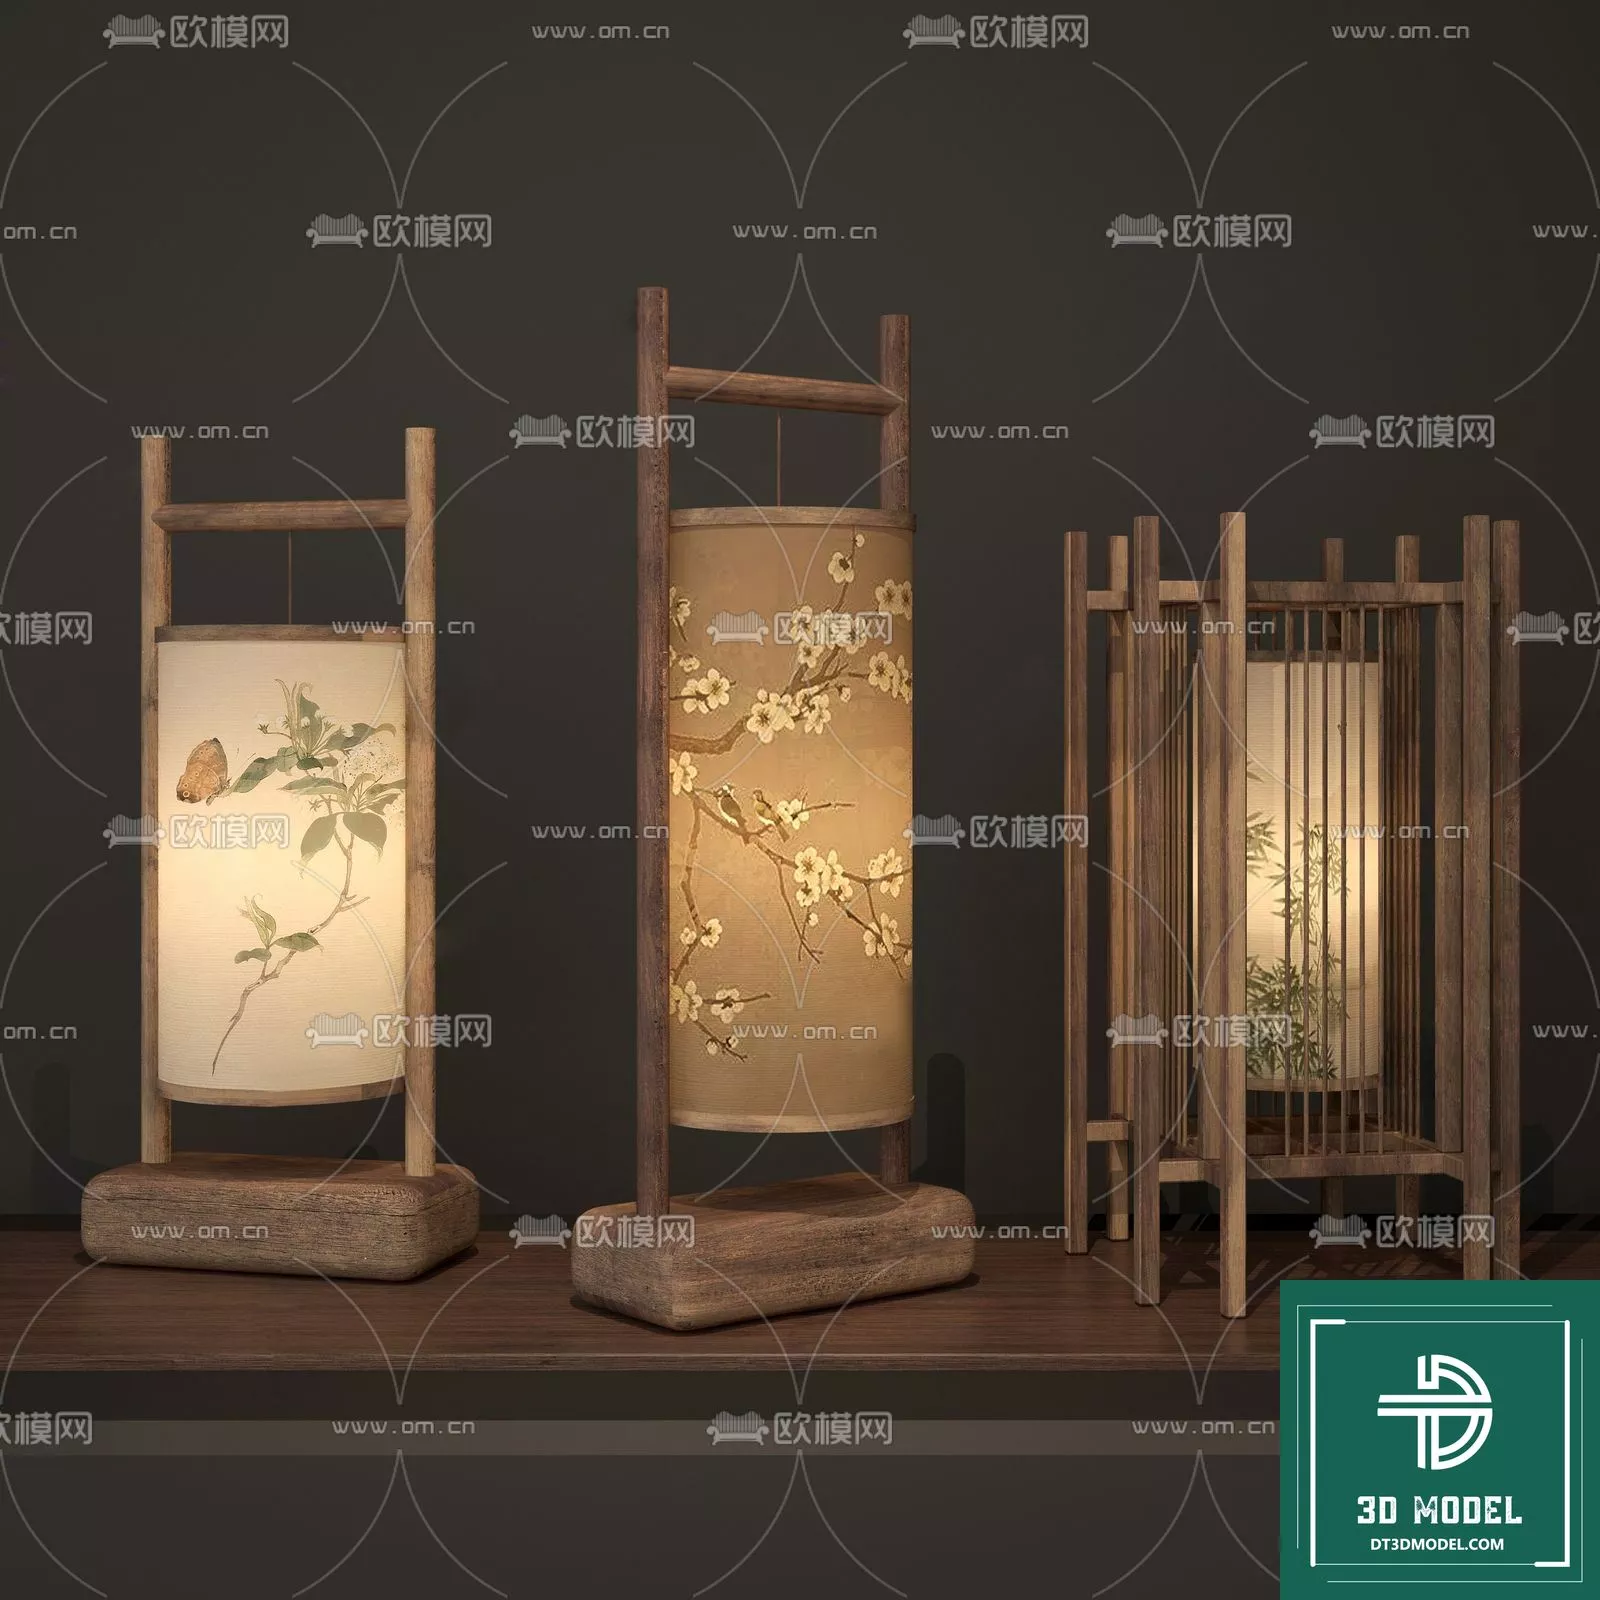 MODERN TABLE LAMP - SKETCHUP 3D MODEL - VRAY OR ENSCAPE - ID14581